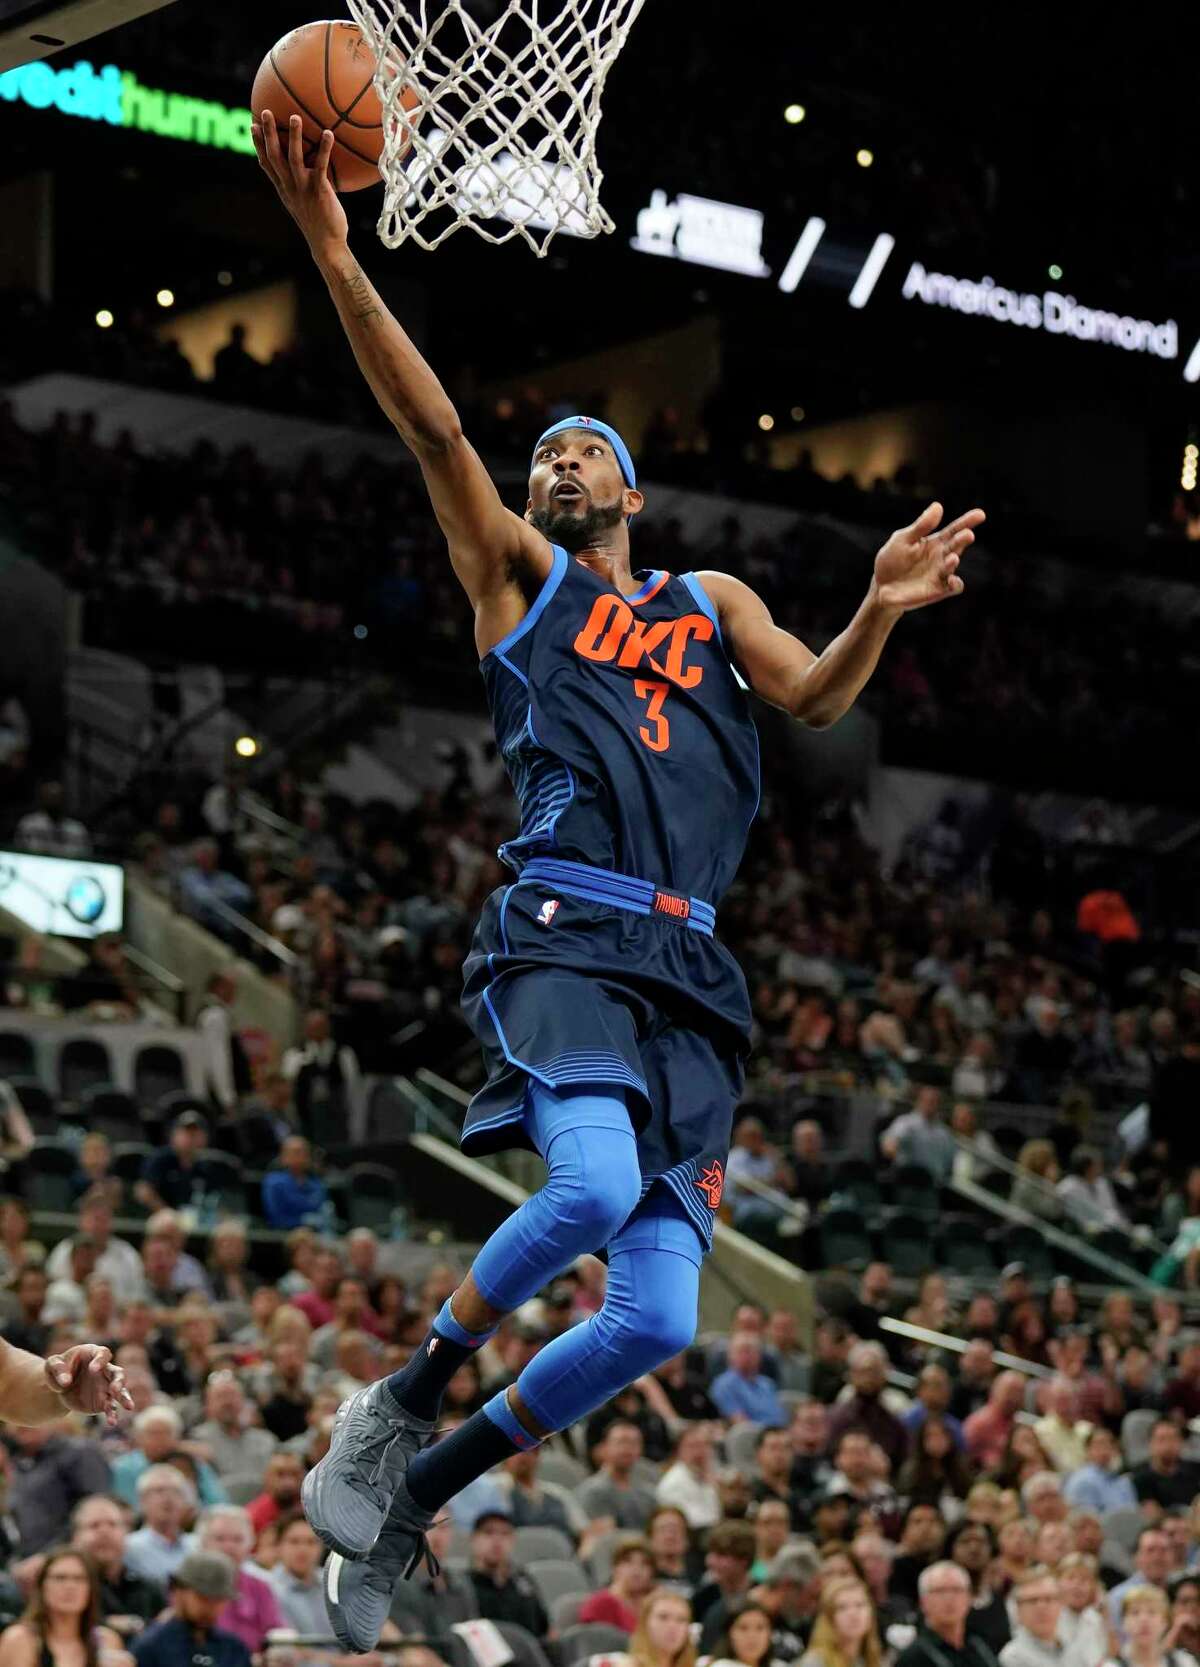 Oklahoma City Thunder's Corey Brewer shoots during the first half of the team's NBA basketball game against the San Antonio Spurs, Thursday, March 29, 2018, in San Antonio. (AP Photo/Darren Abate)